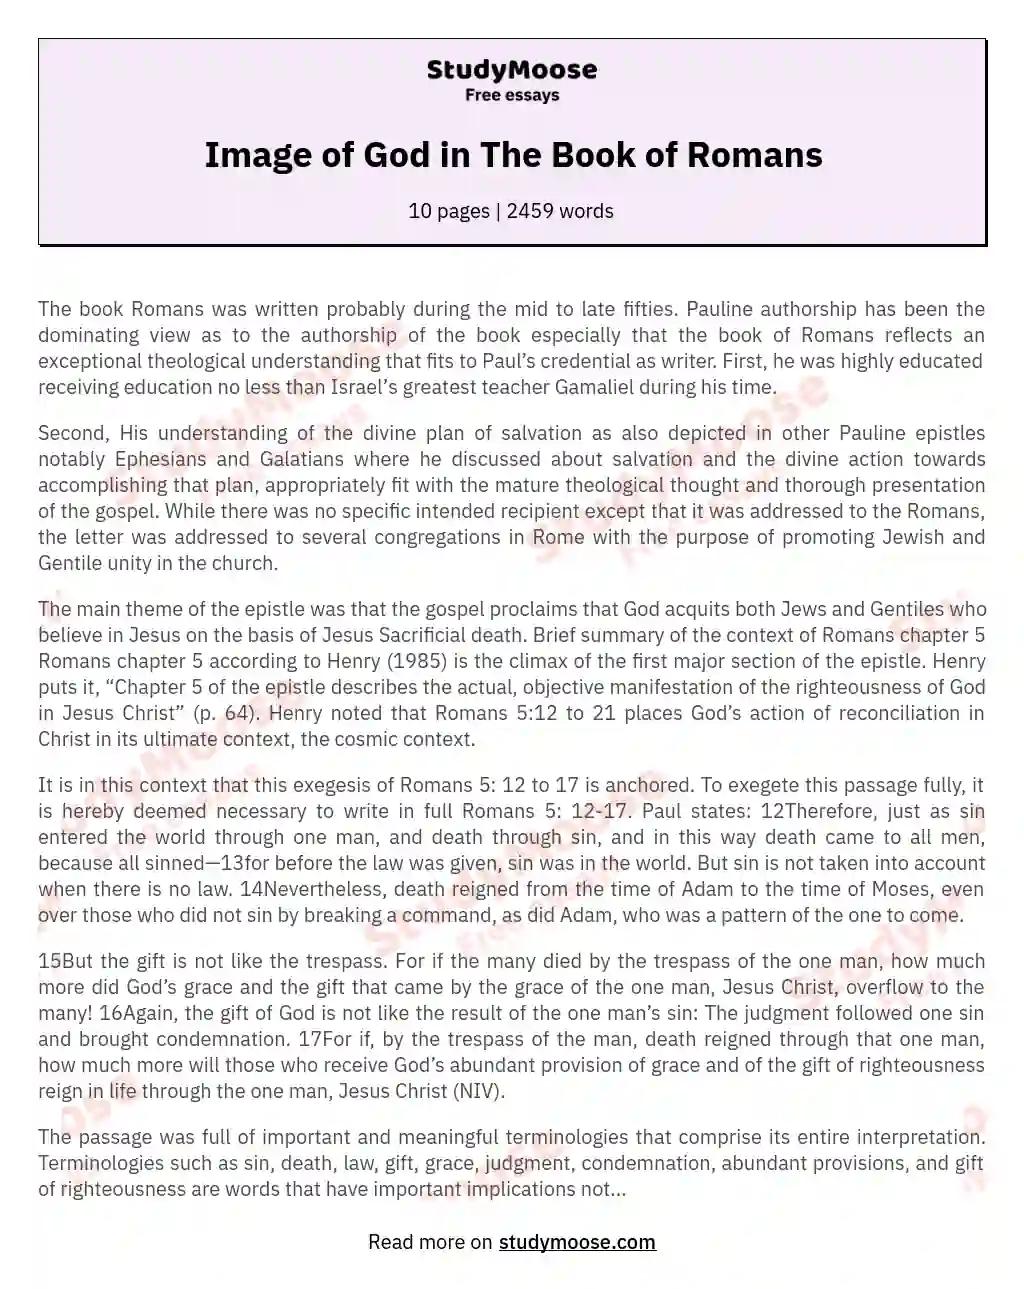 Image of God in The Book of Romans